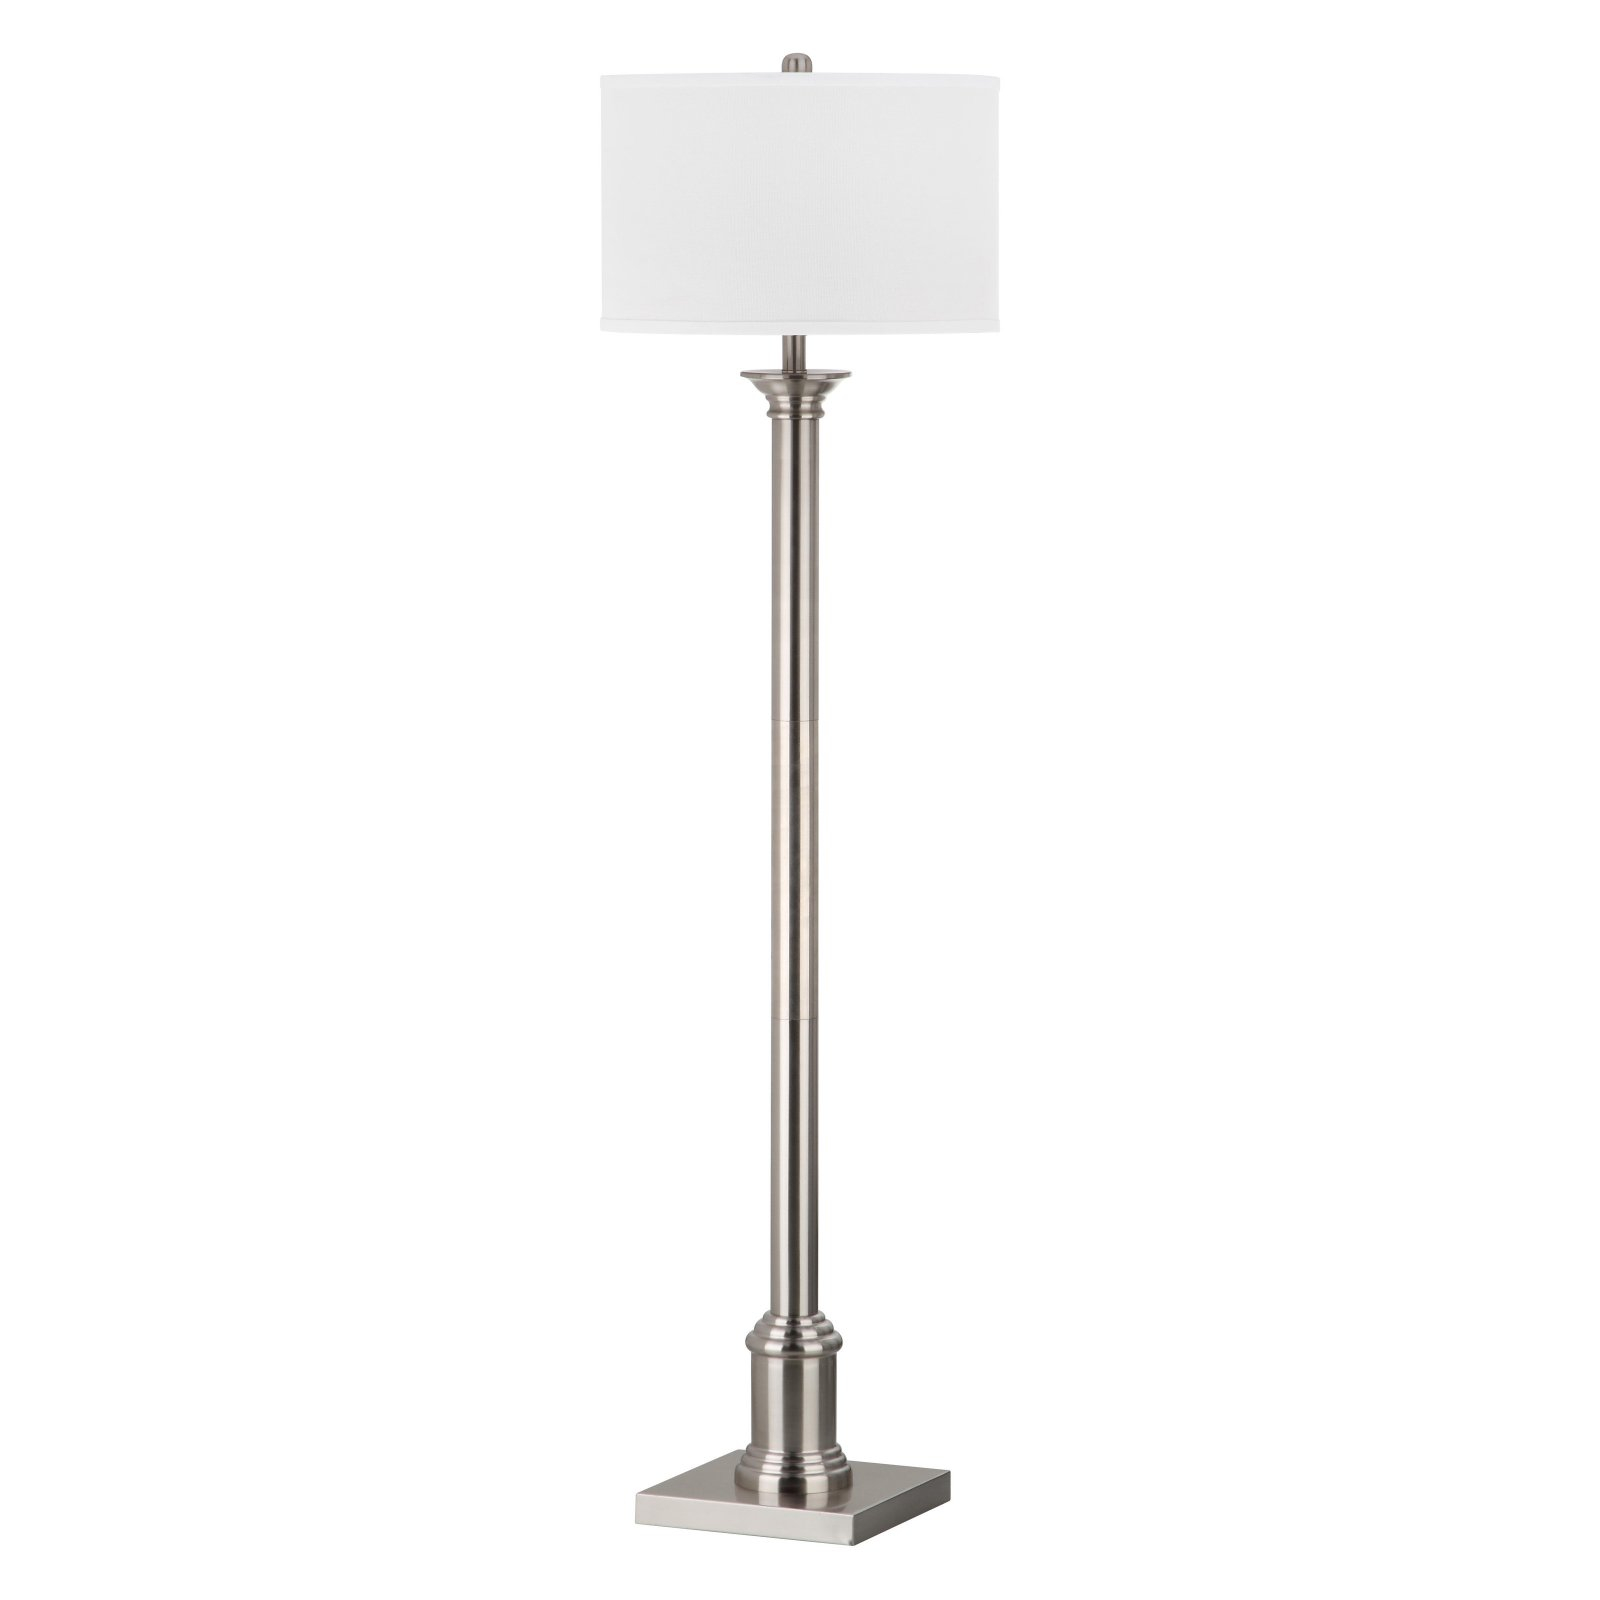 Details About Safavieh Livia 60 Inches H Solid Glam Floor Lamp Nickel Or Off White Shade New with regard to sizing 1600 X 1600